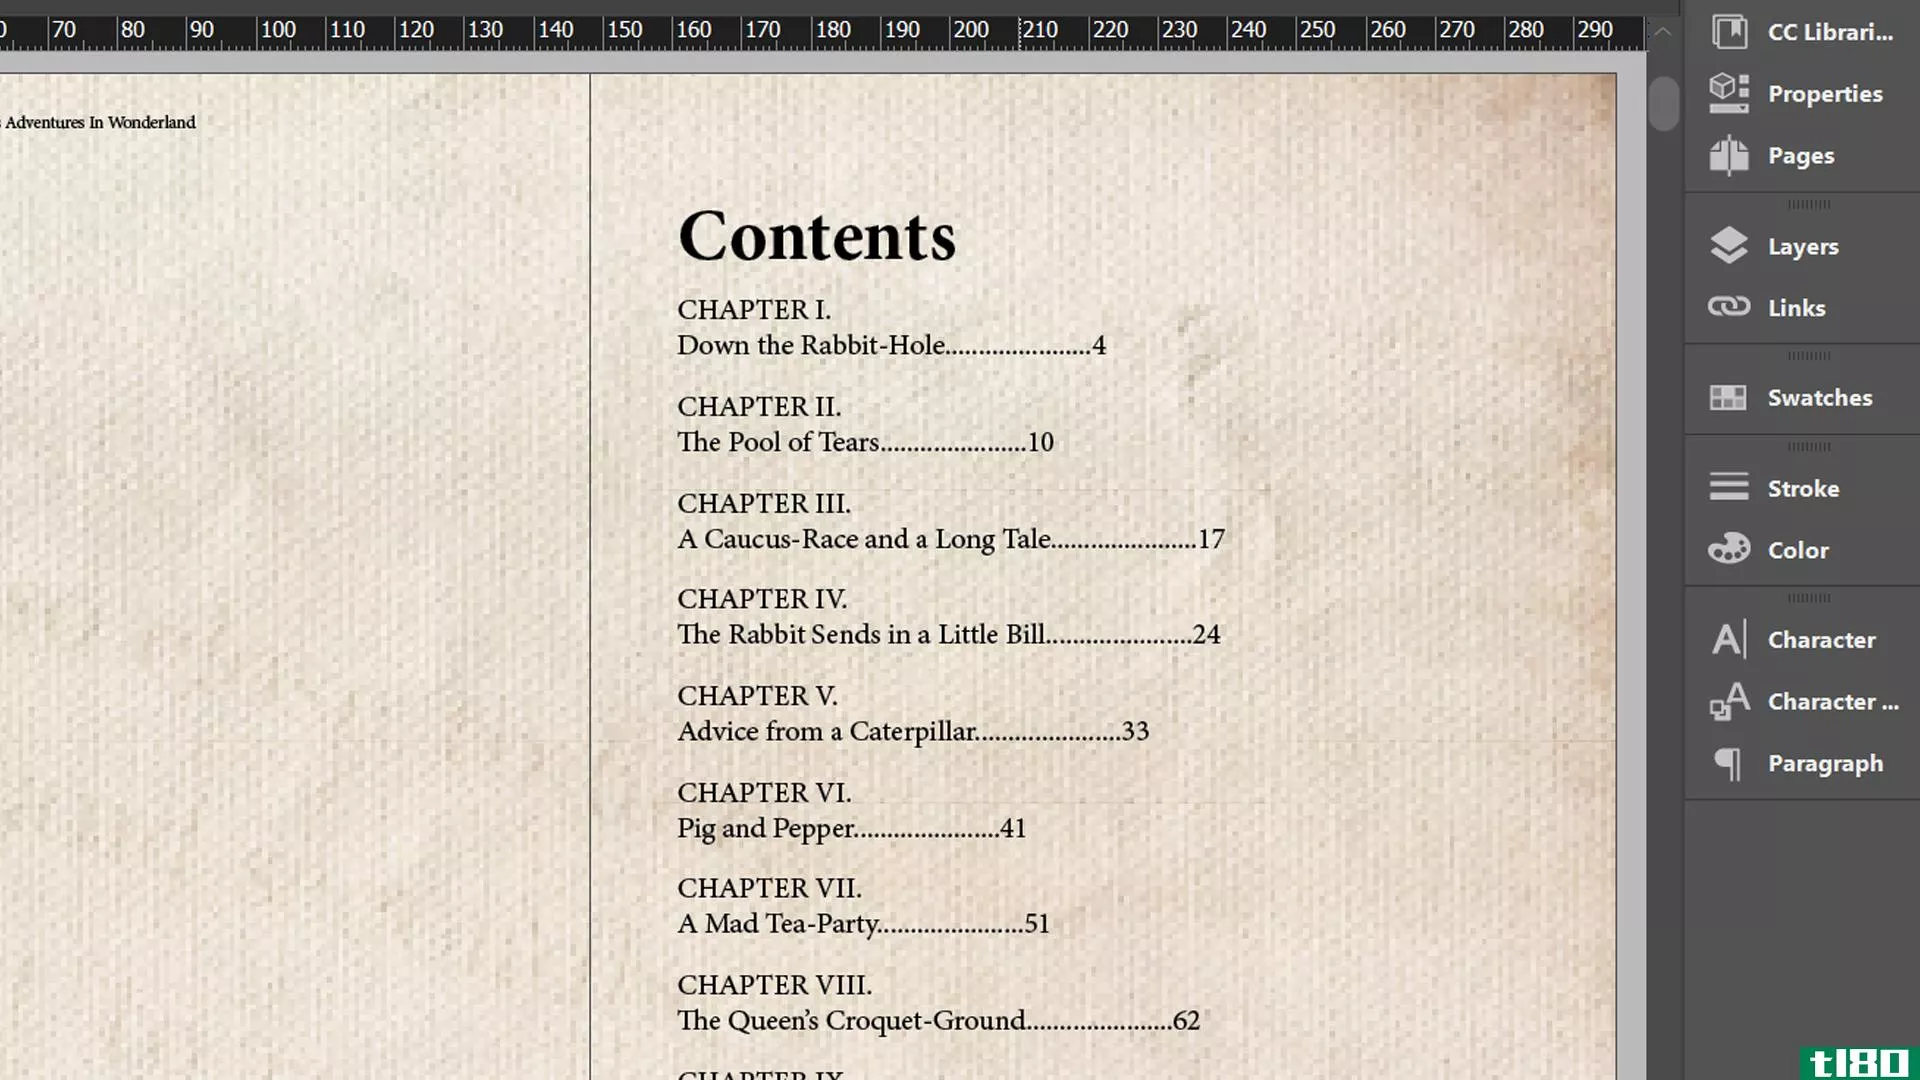 InDesign contents page with dots between titles and numbers